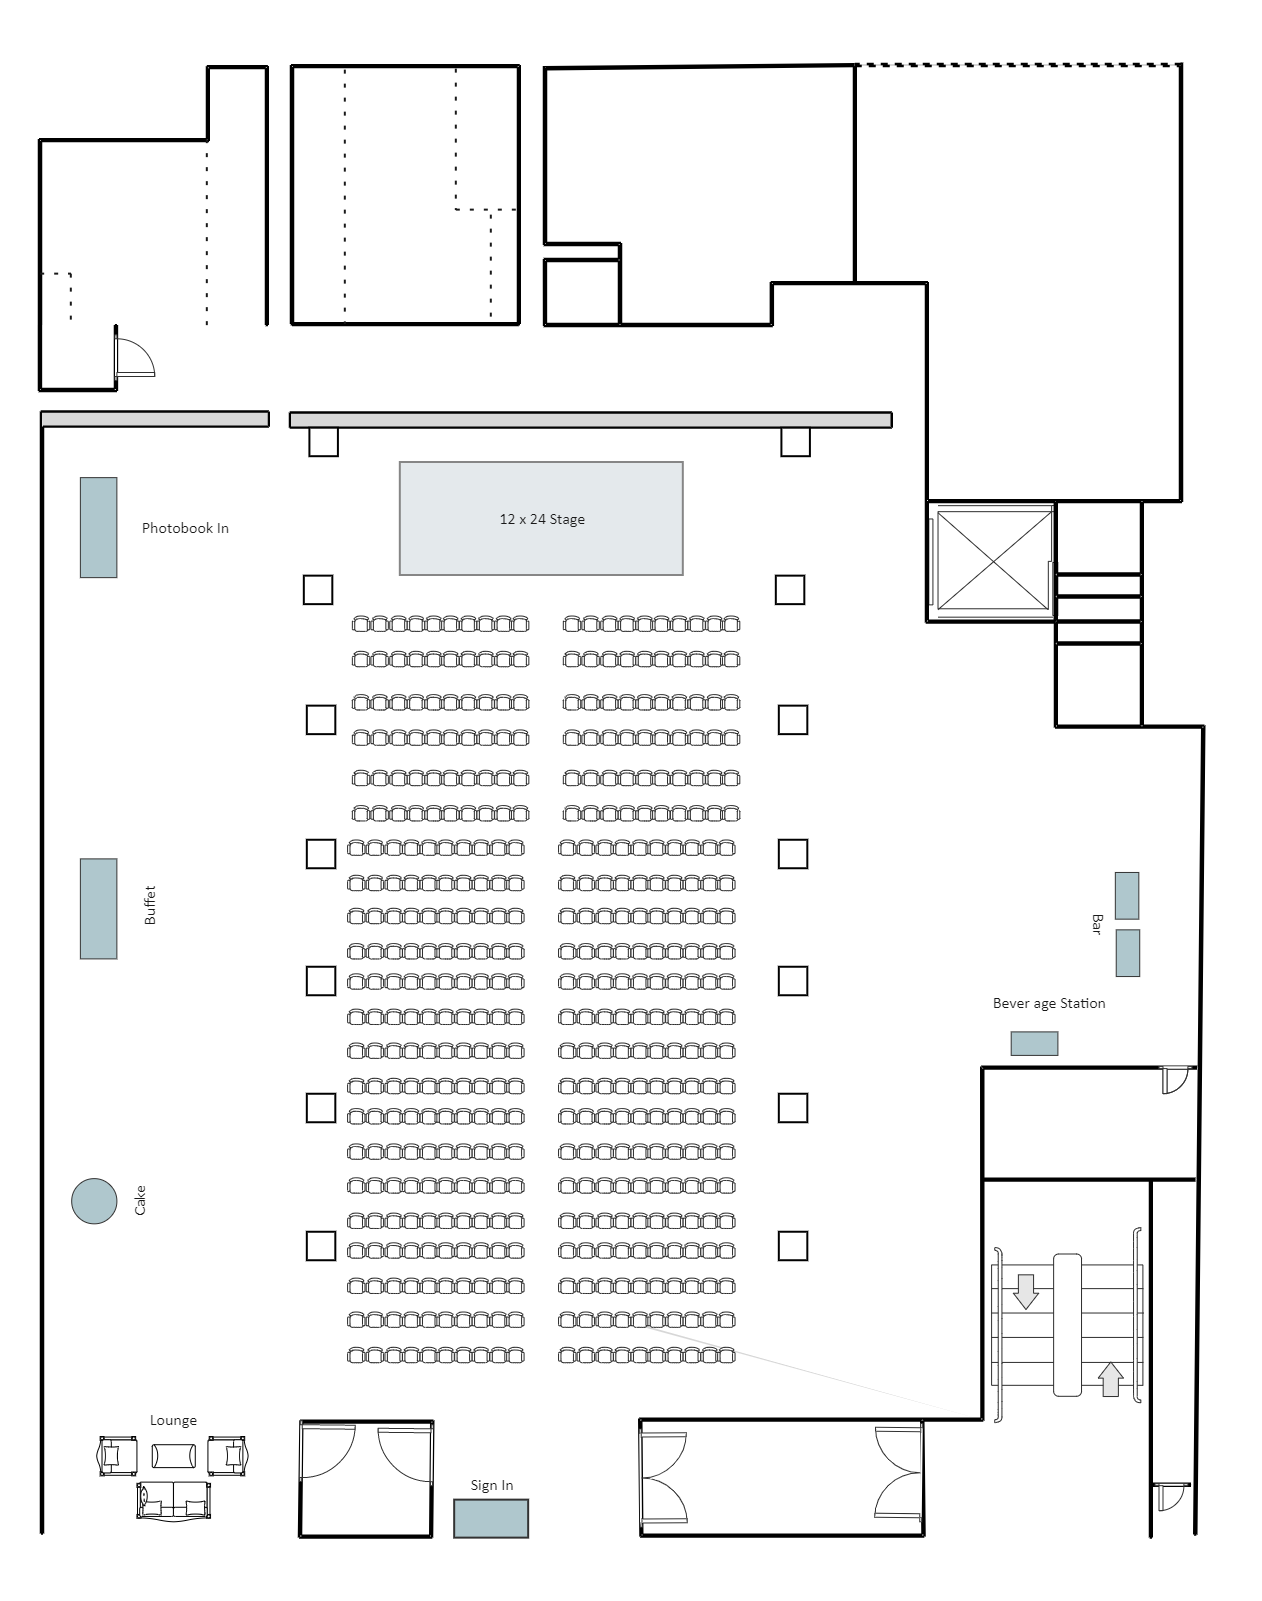 Conference Room Seating Plan | EdrawMax Template